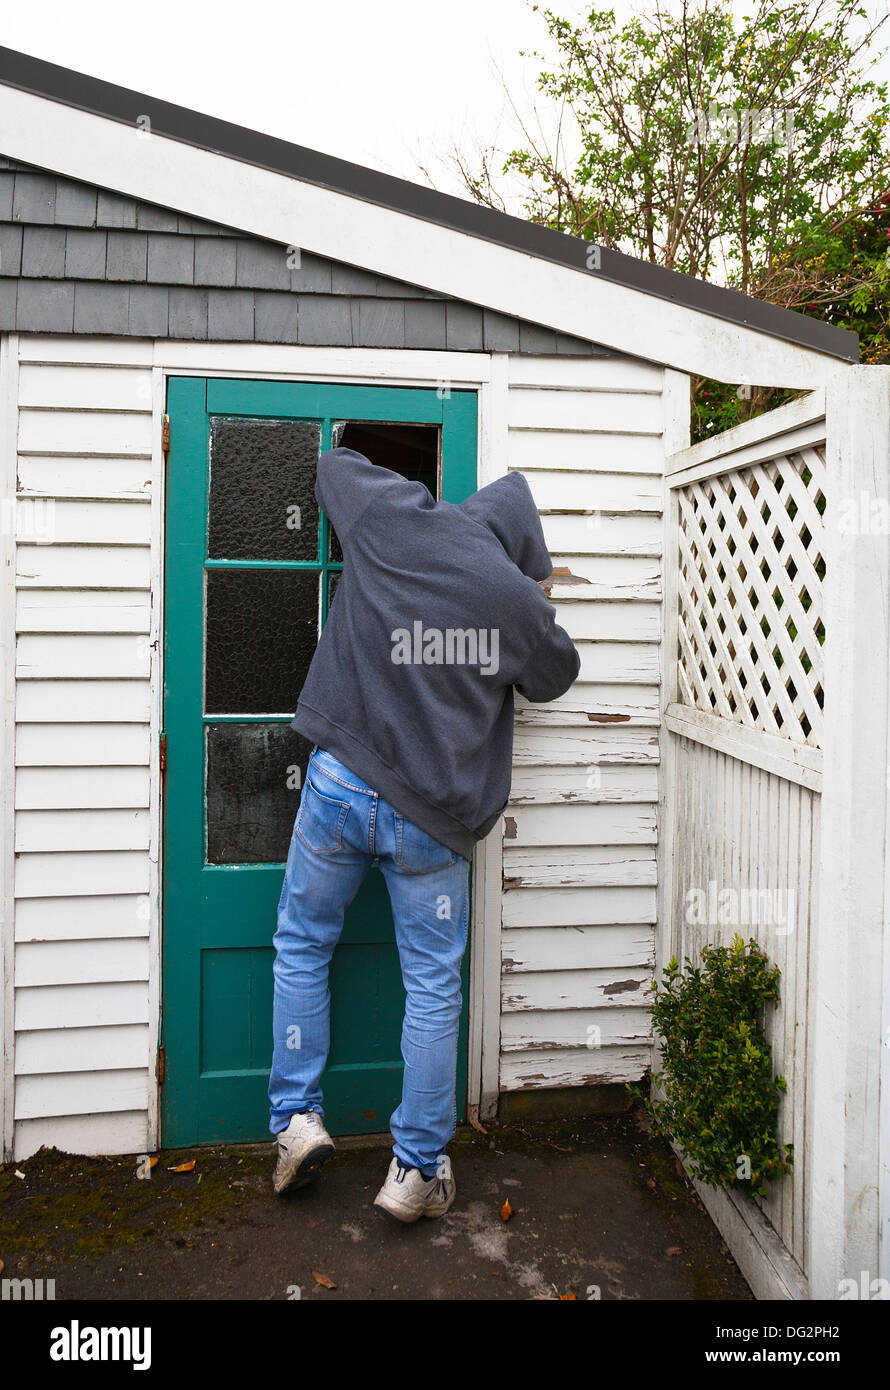 A suspicious person, man wearing a hooded jacket breaking into a garden shed or garage. Stock Photo